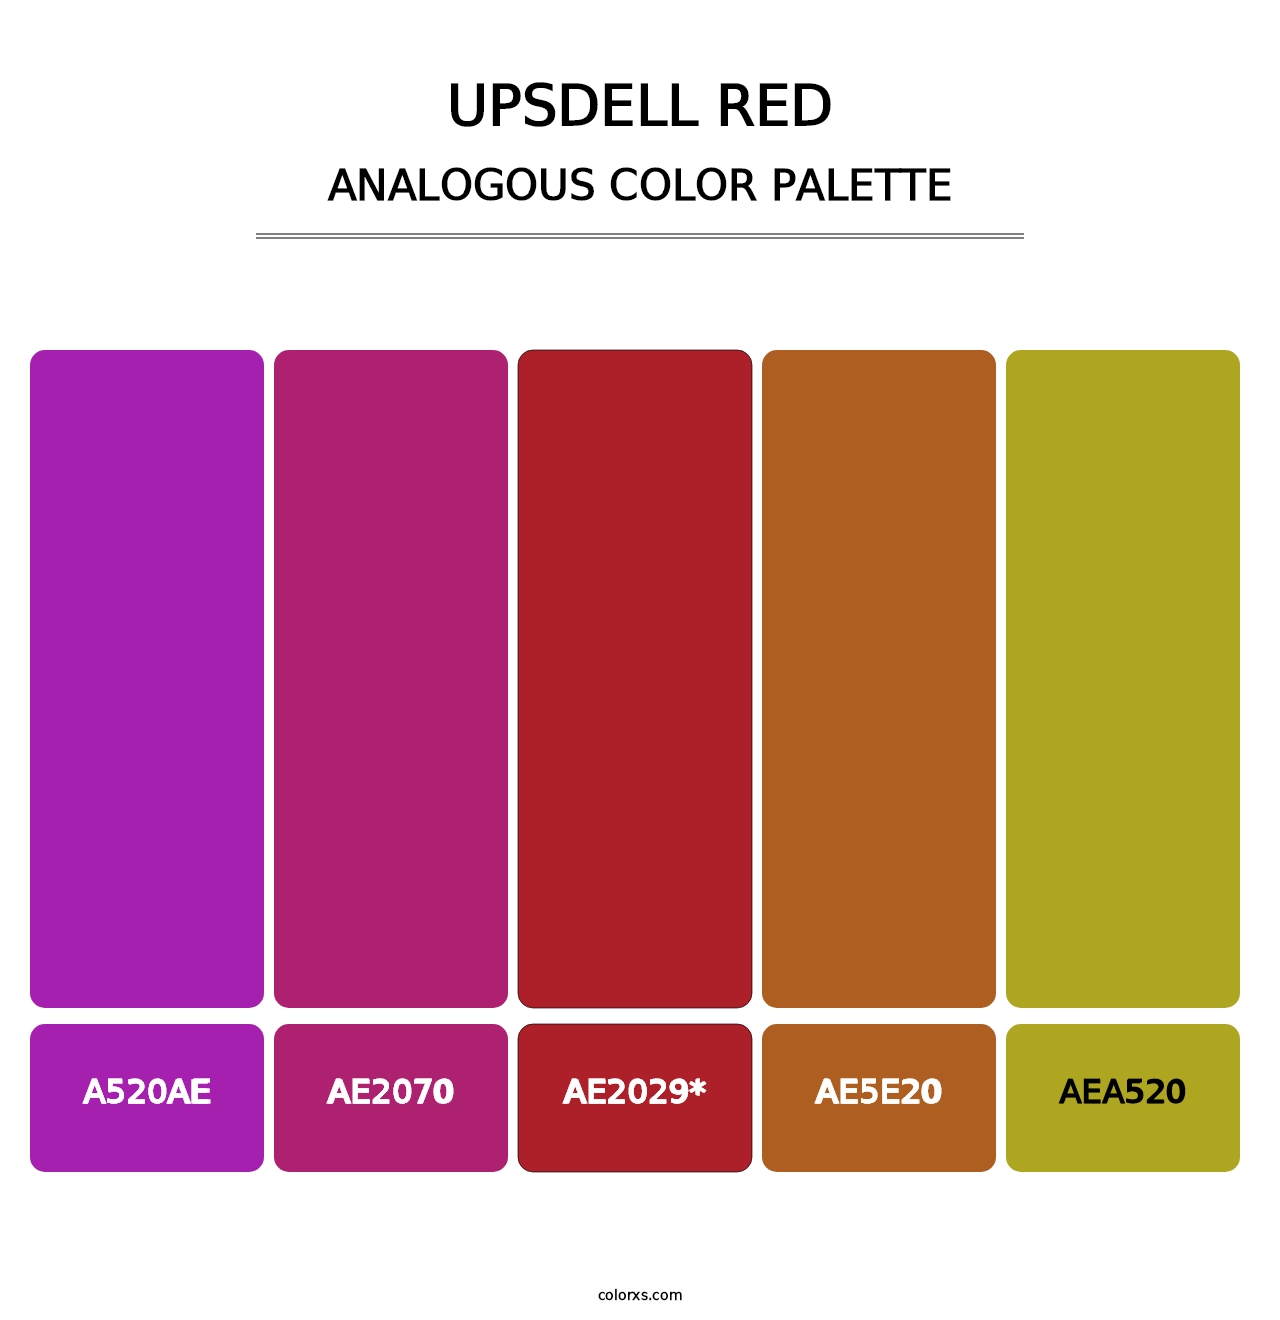 Upsdell Red - Analogous Color Palette